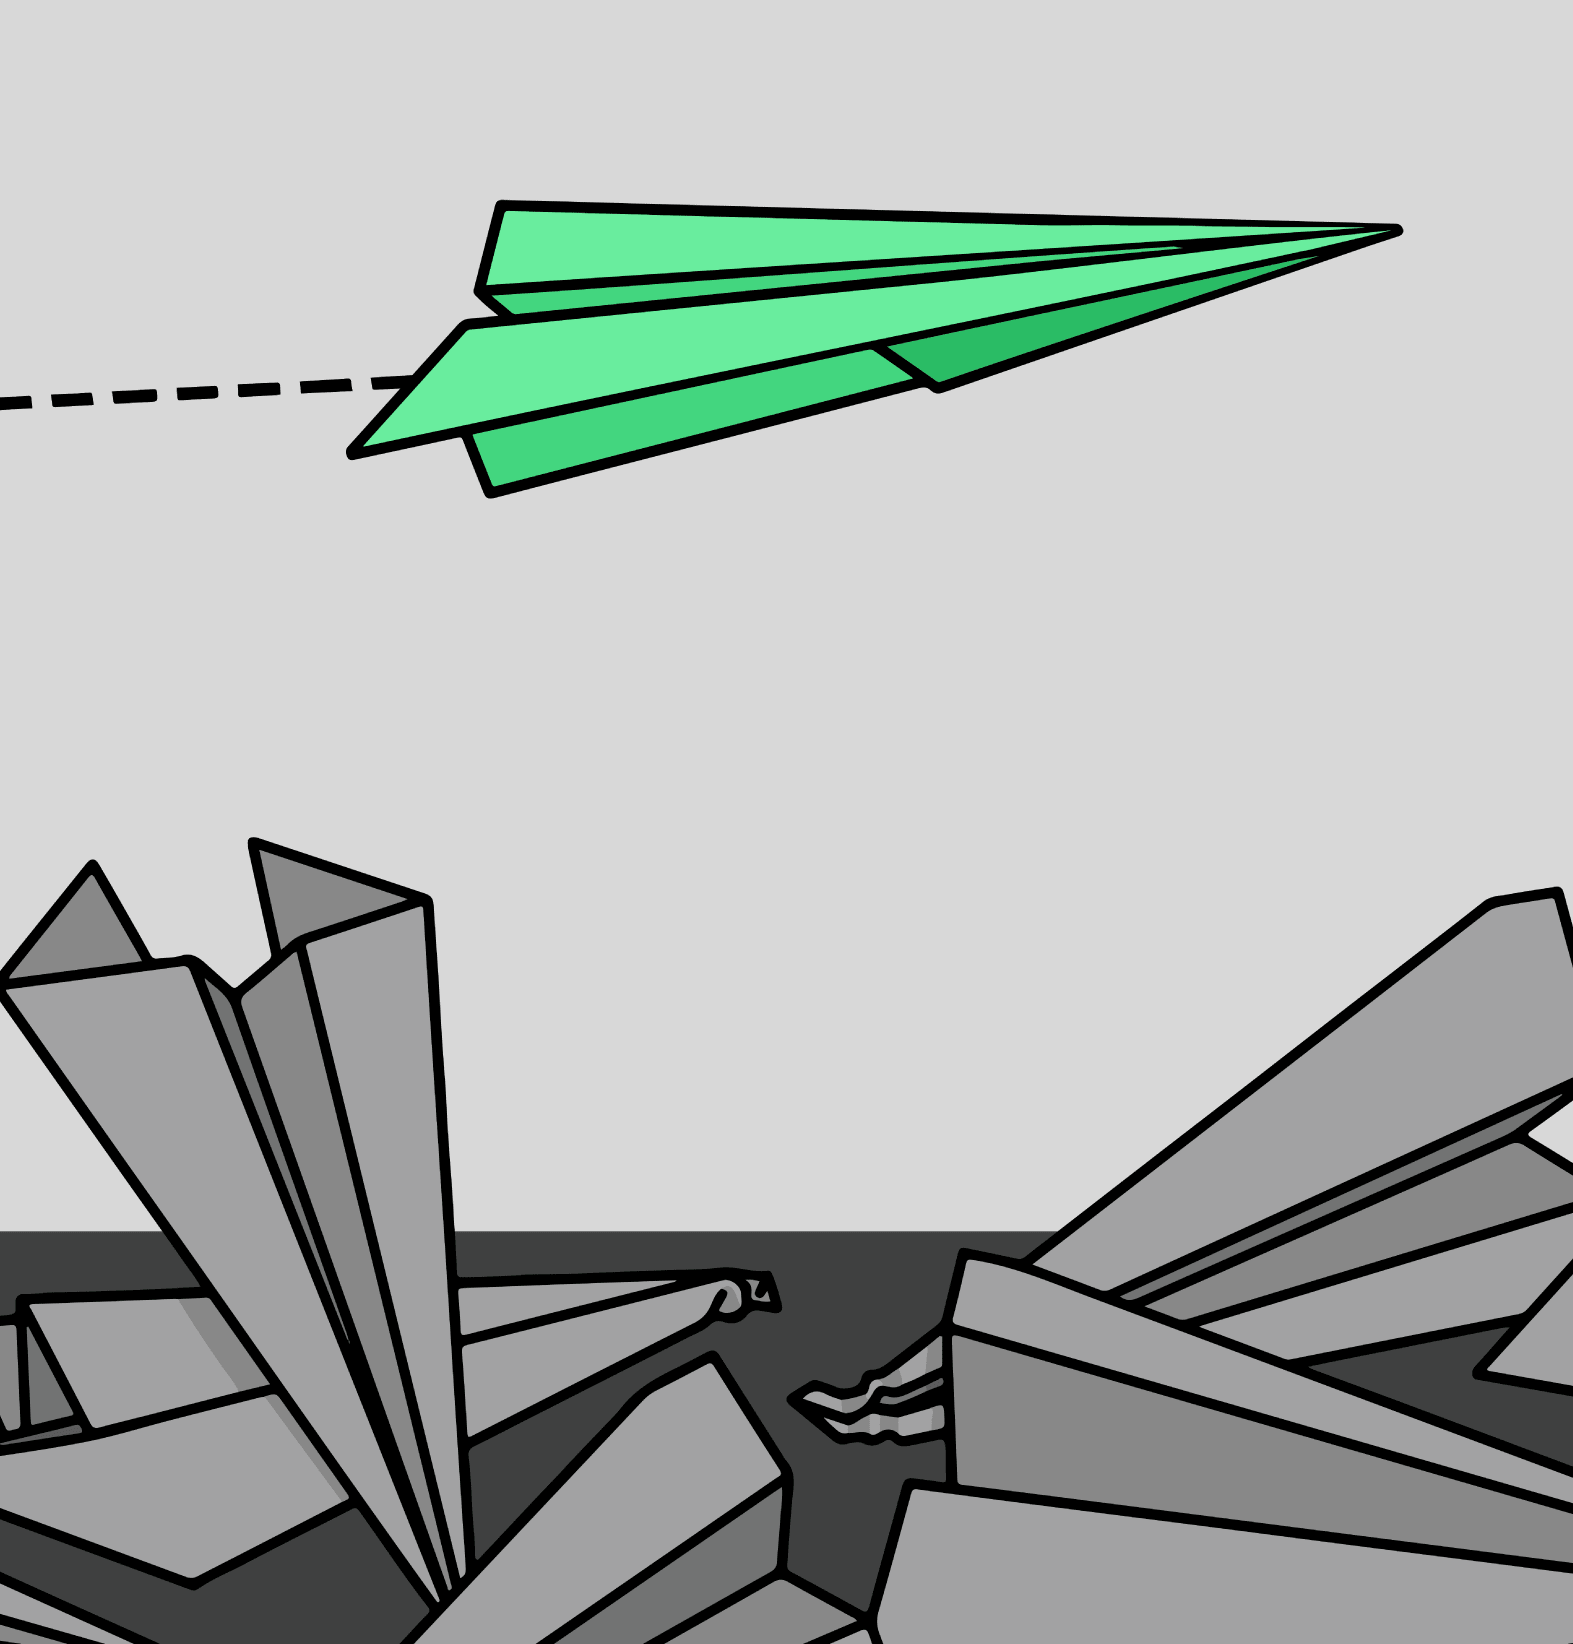 a green paper plane flying over a pile of ruined grey paper planes